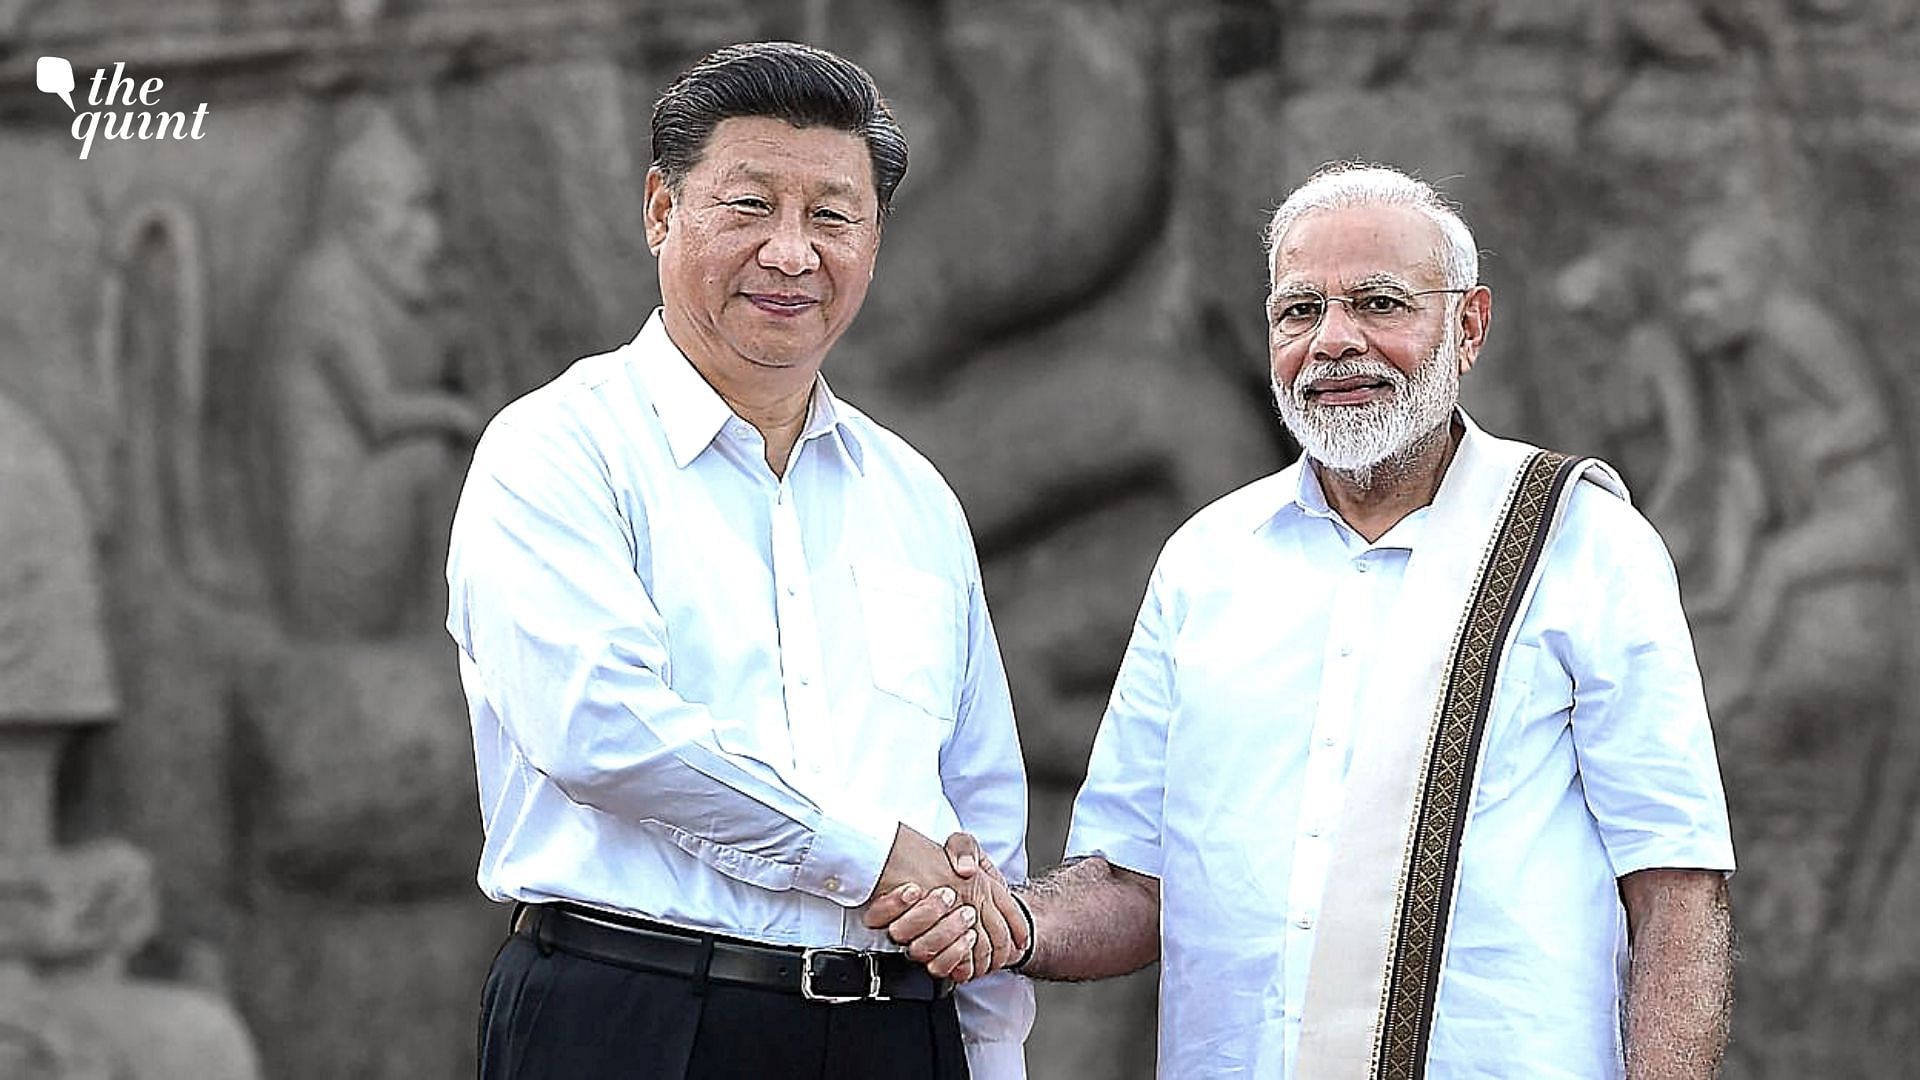 “Words don’t matter to China. Even at the highest levels commitments are made lightly,” writes Vishnu Prakash.